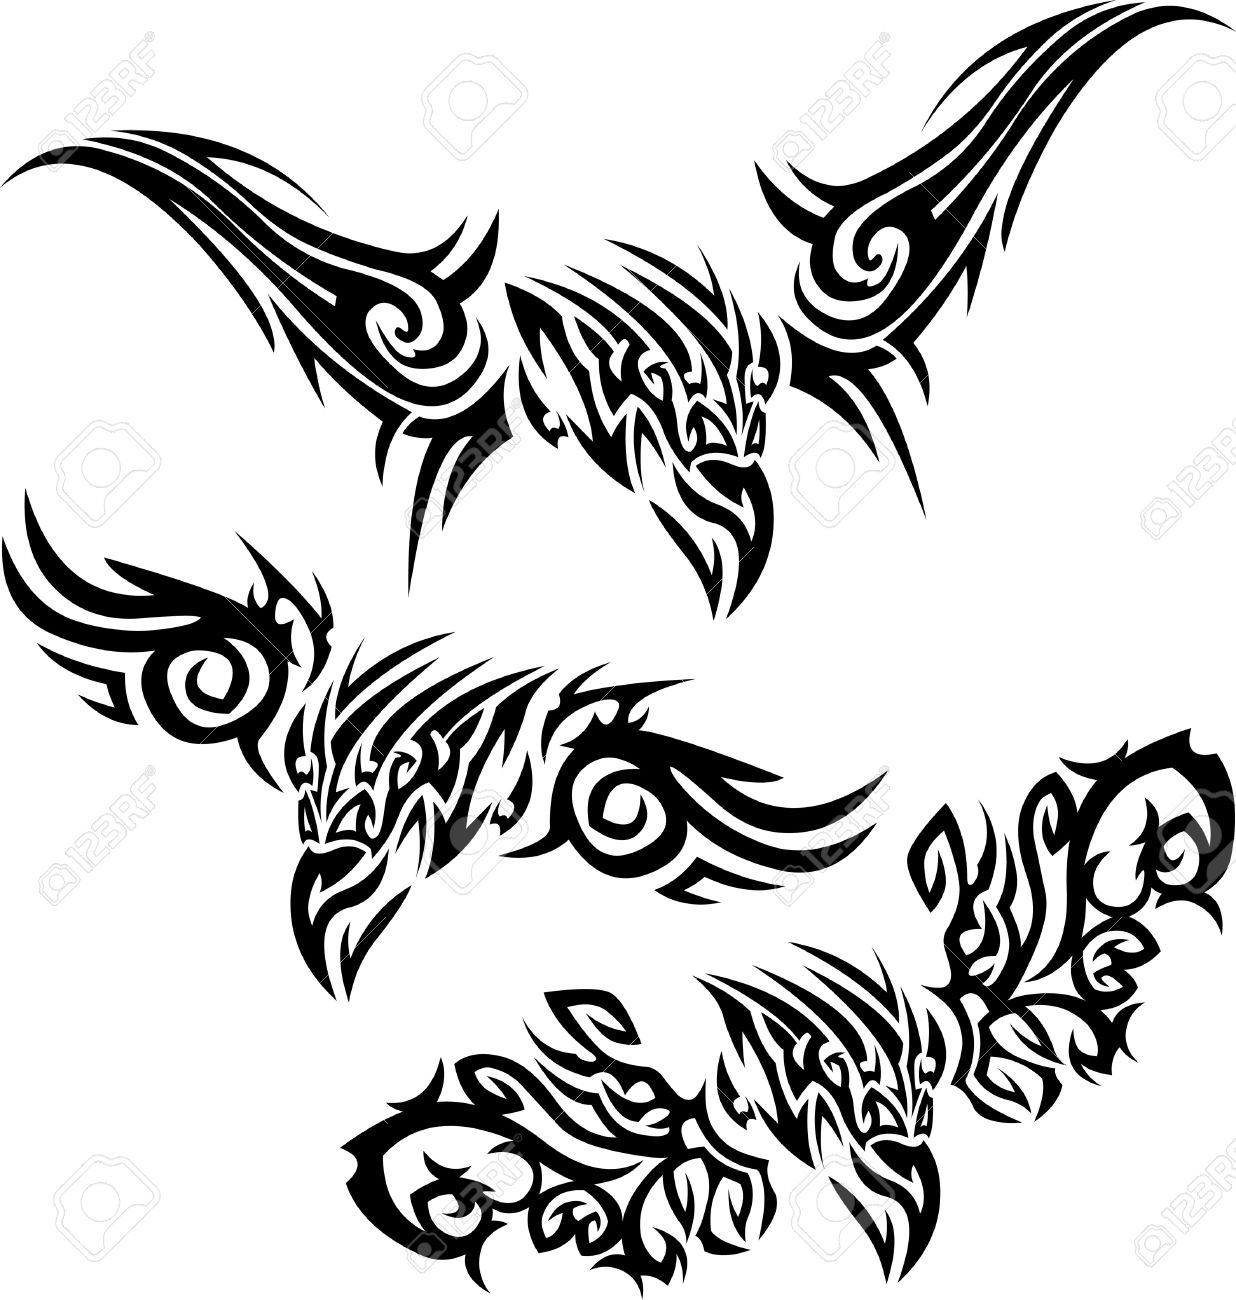 Tattoos Birds Of Prey Royalty Free Cliparts Vectors And Stock throughout dimensions 1236 X 1300